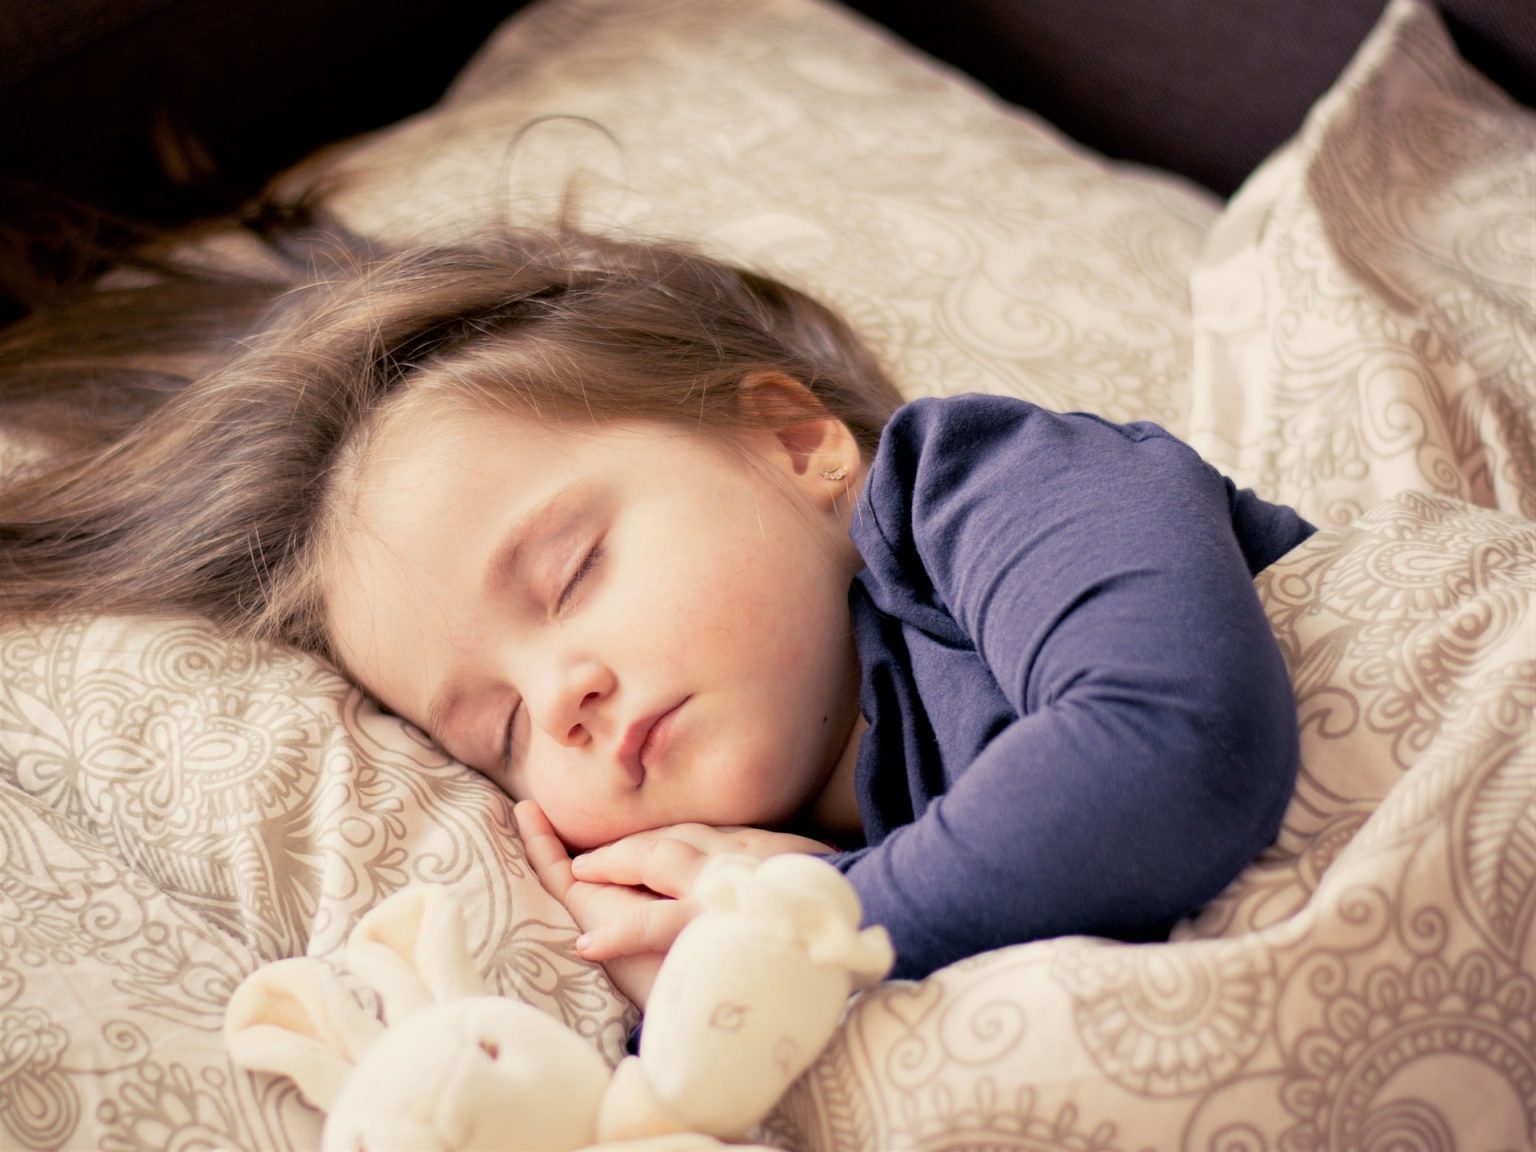 A female toddler sleeping in bed with a stuffed animal.